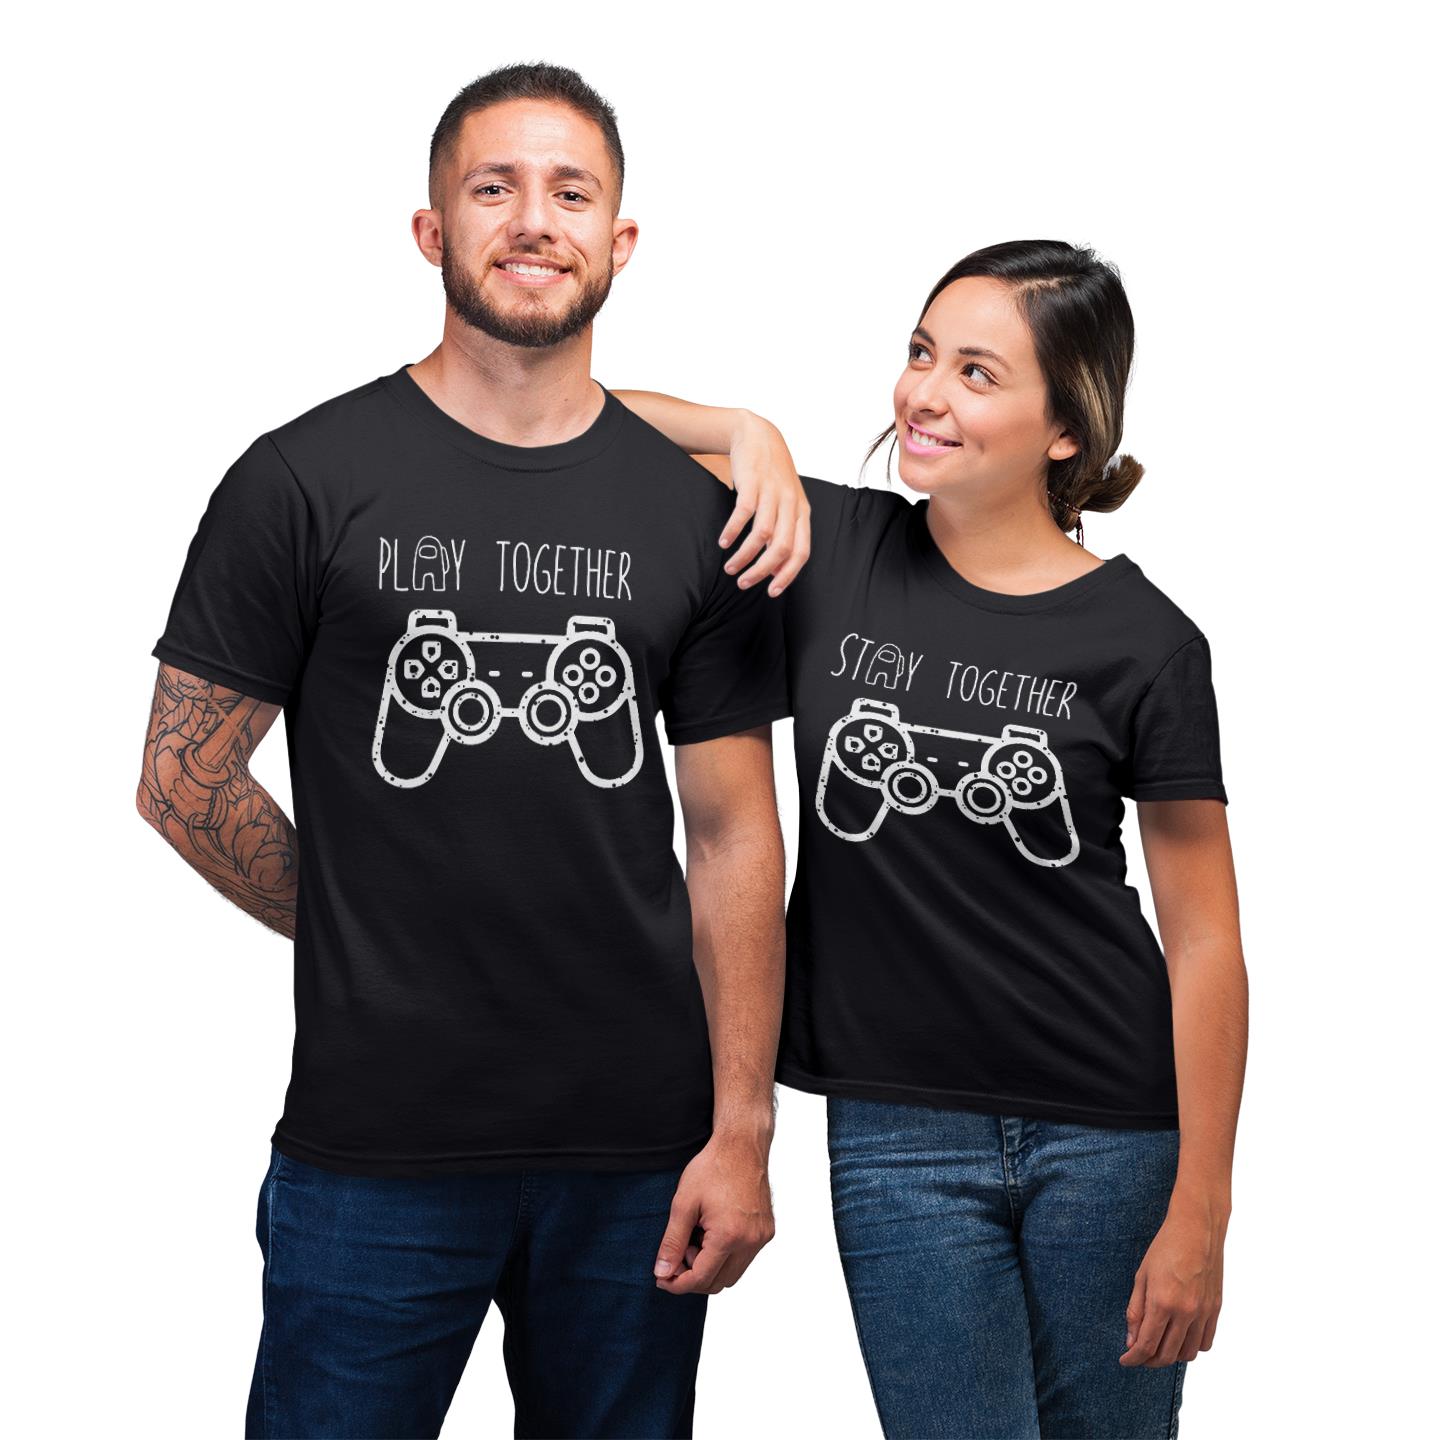 Play Together Stay Together Funny Matching For Couple Gamer Gift T-shirt